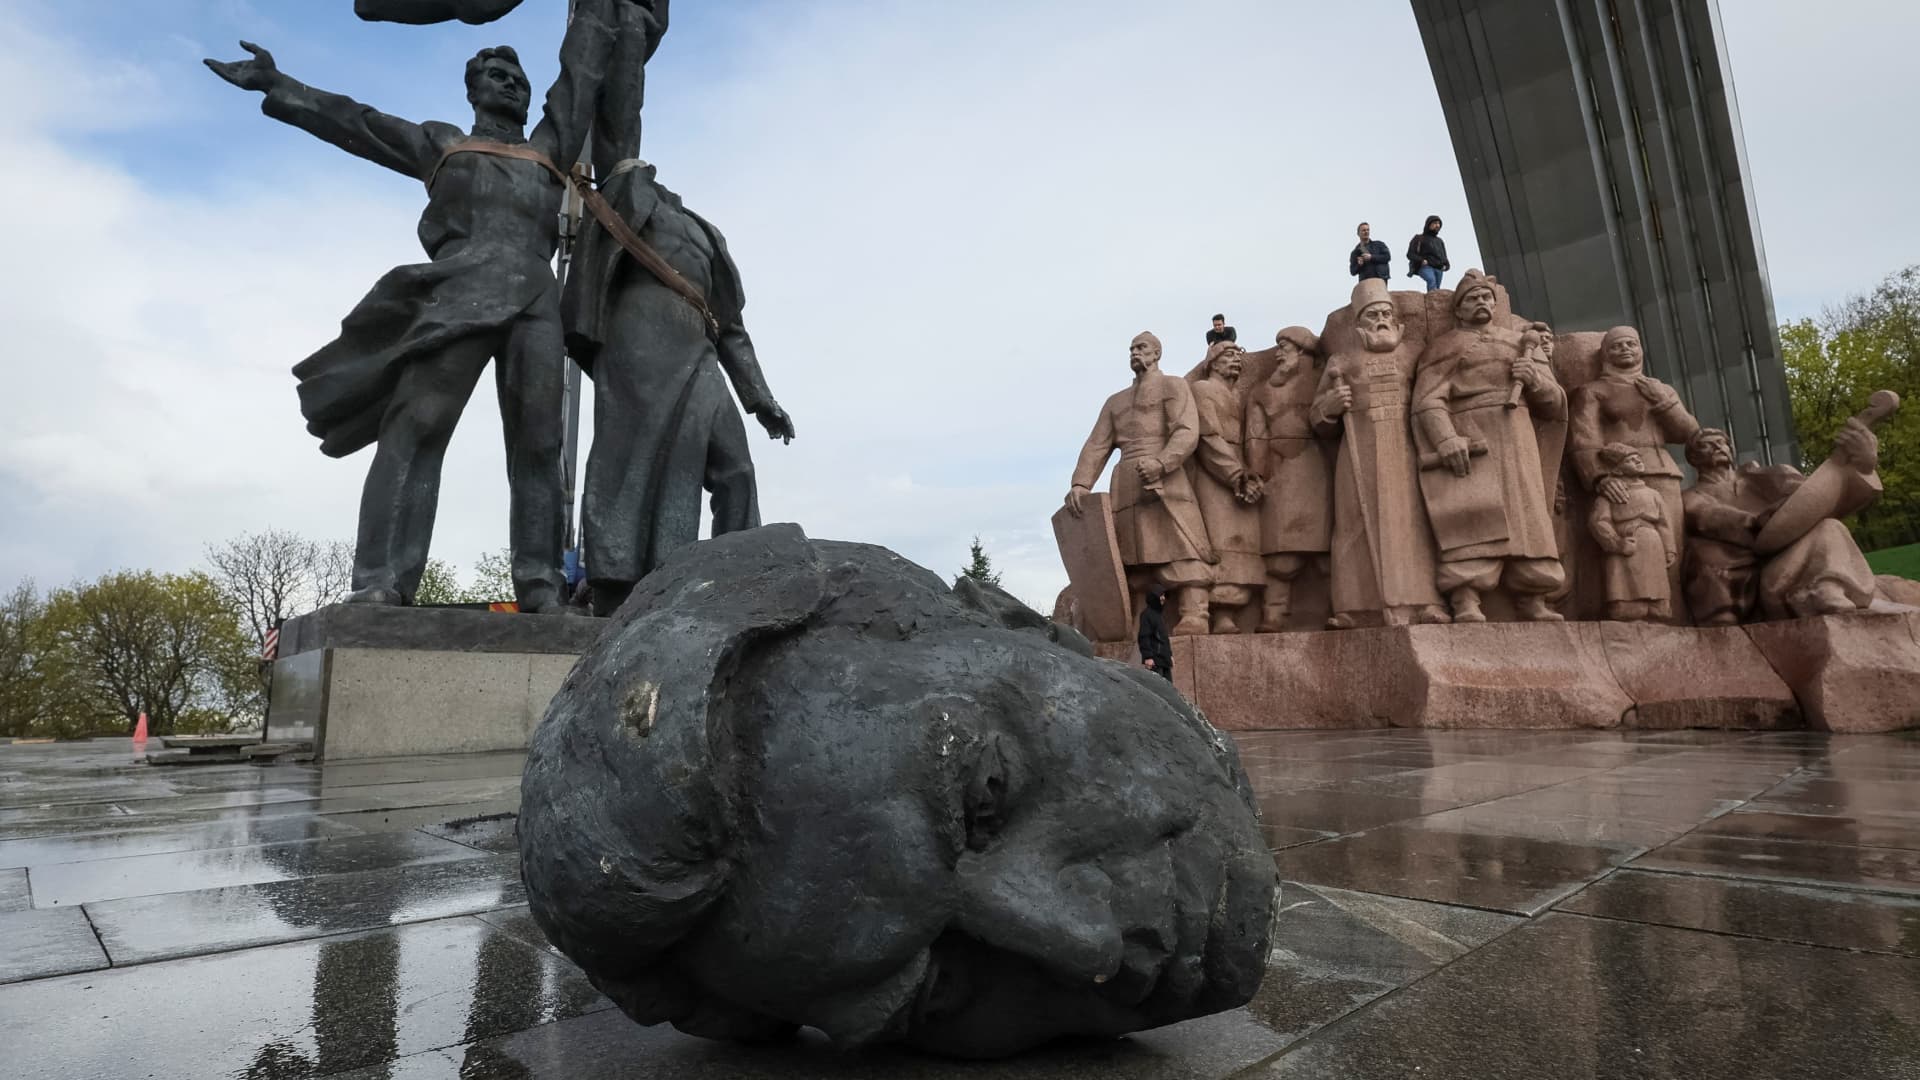 A Soviet monument to a friendship between Ukrainian and Russian nations is seen during its demolition, amid Russia's invasion of Ukraine, in central Kyiv, Ukraine April 26, 2022.